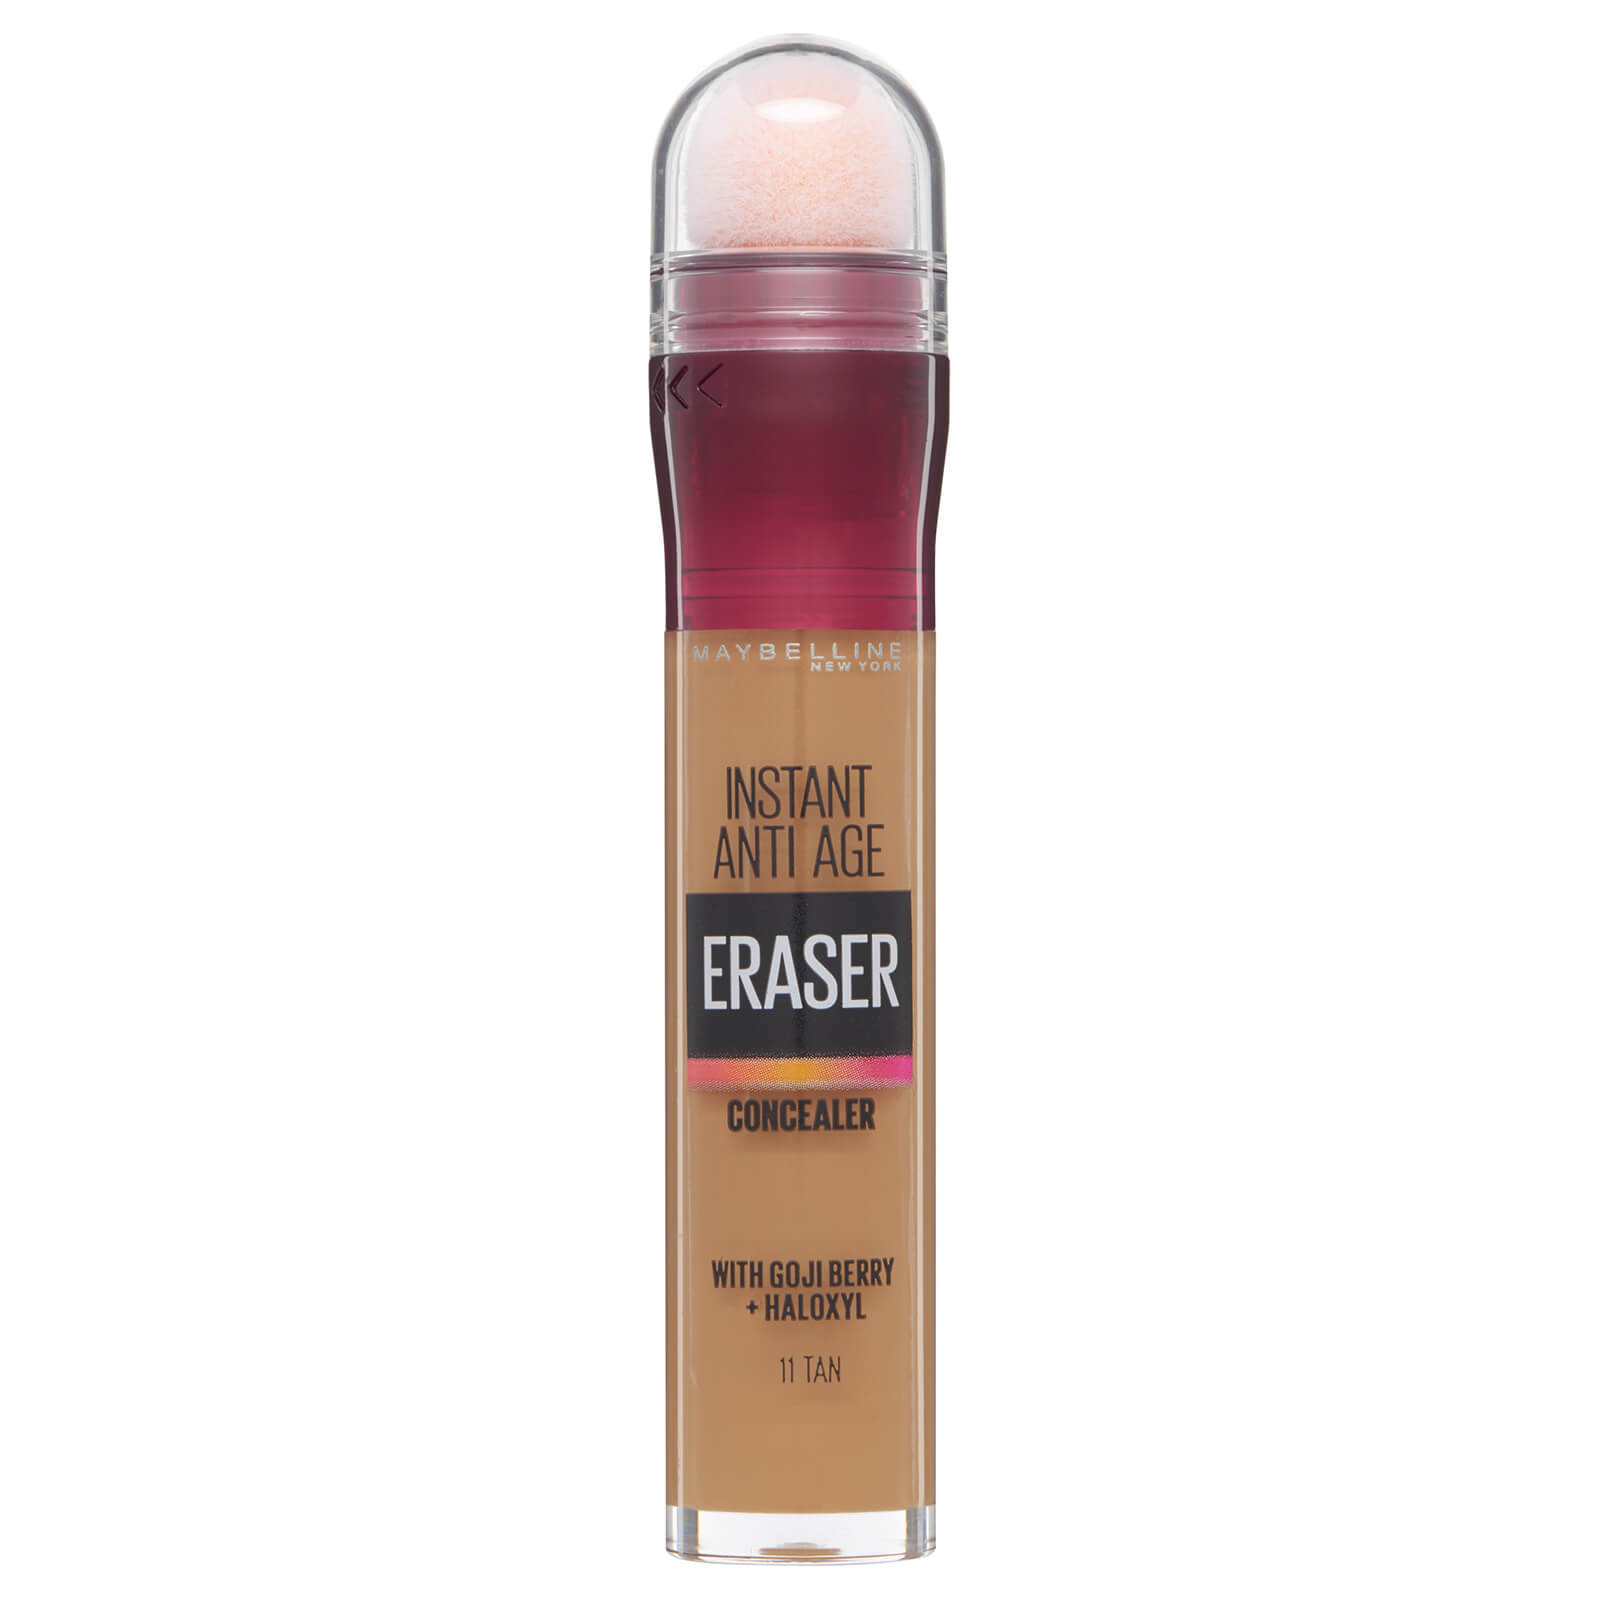 Maybelline Instant Anti Age Eraser Concealer 6.8ml (Various Shades) - 0 11 Tan